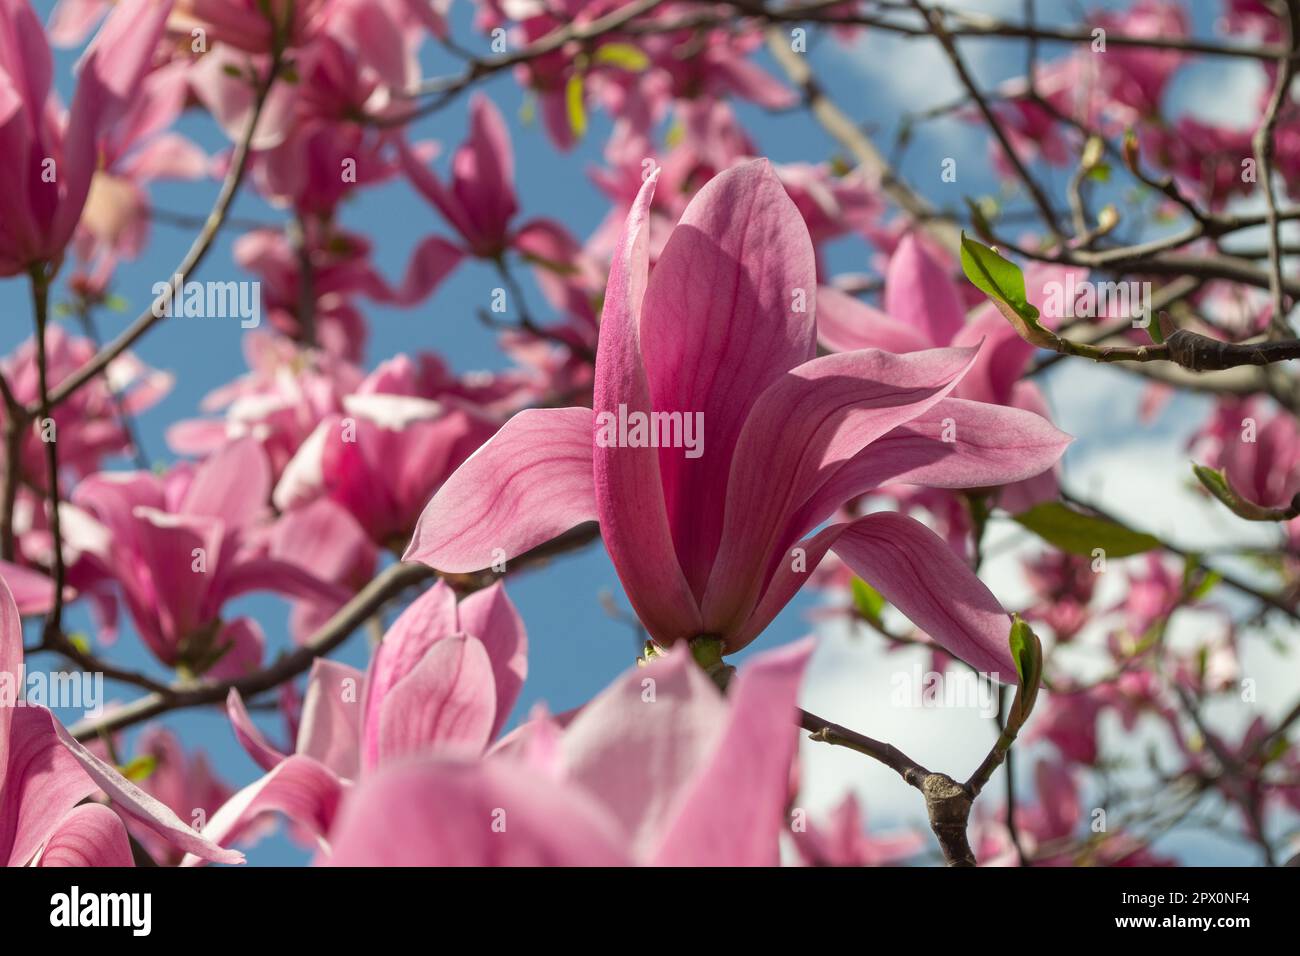 Magnolia soulangeana Flower on a twig blooming against clear blue sky at spring Stock Photo